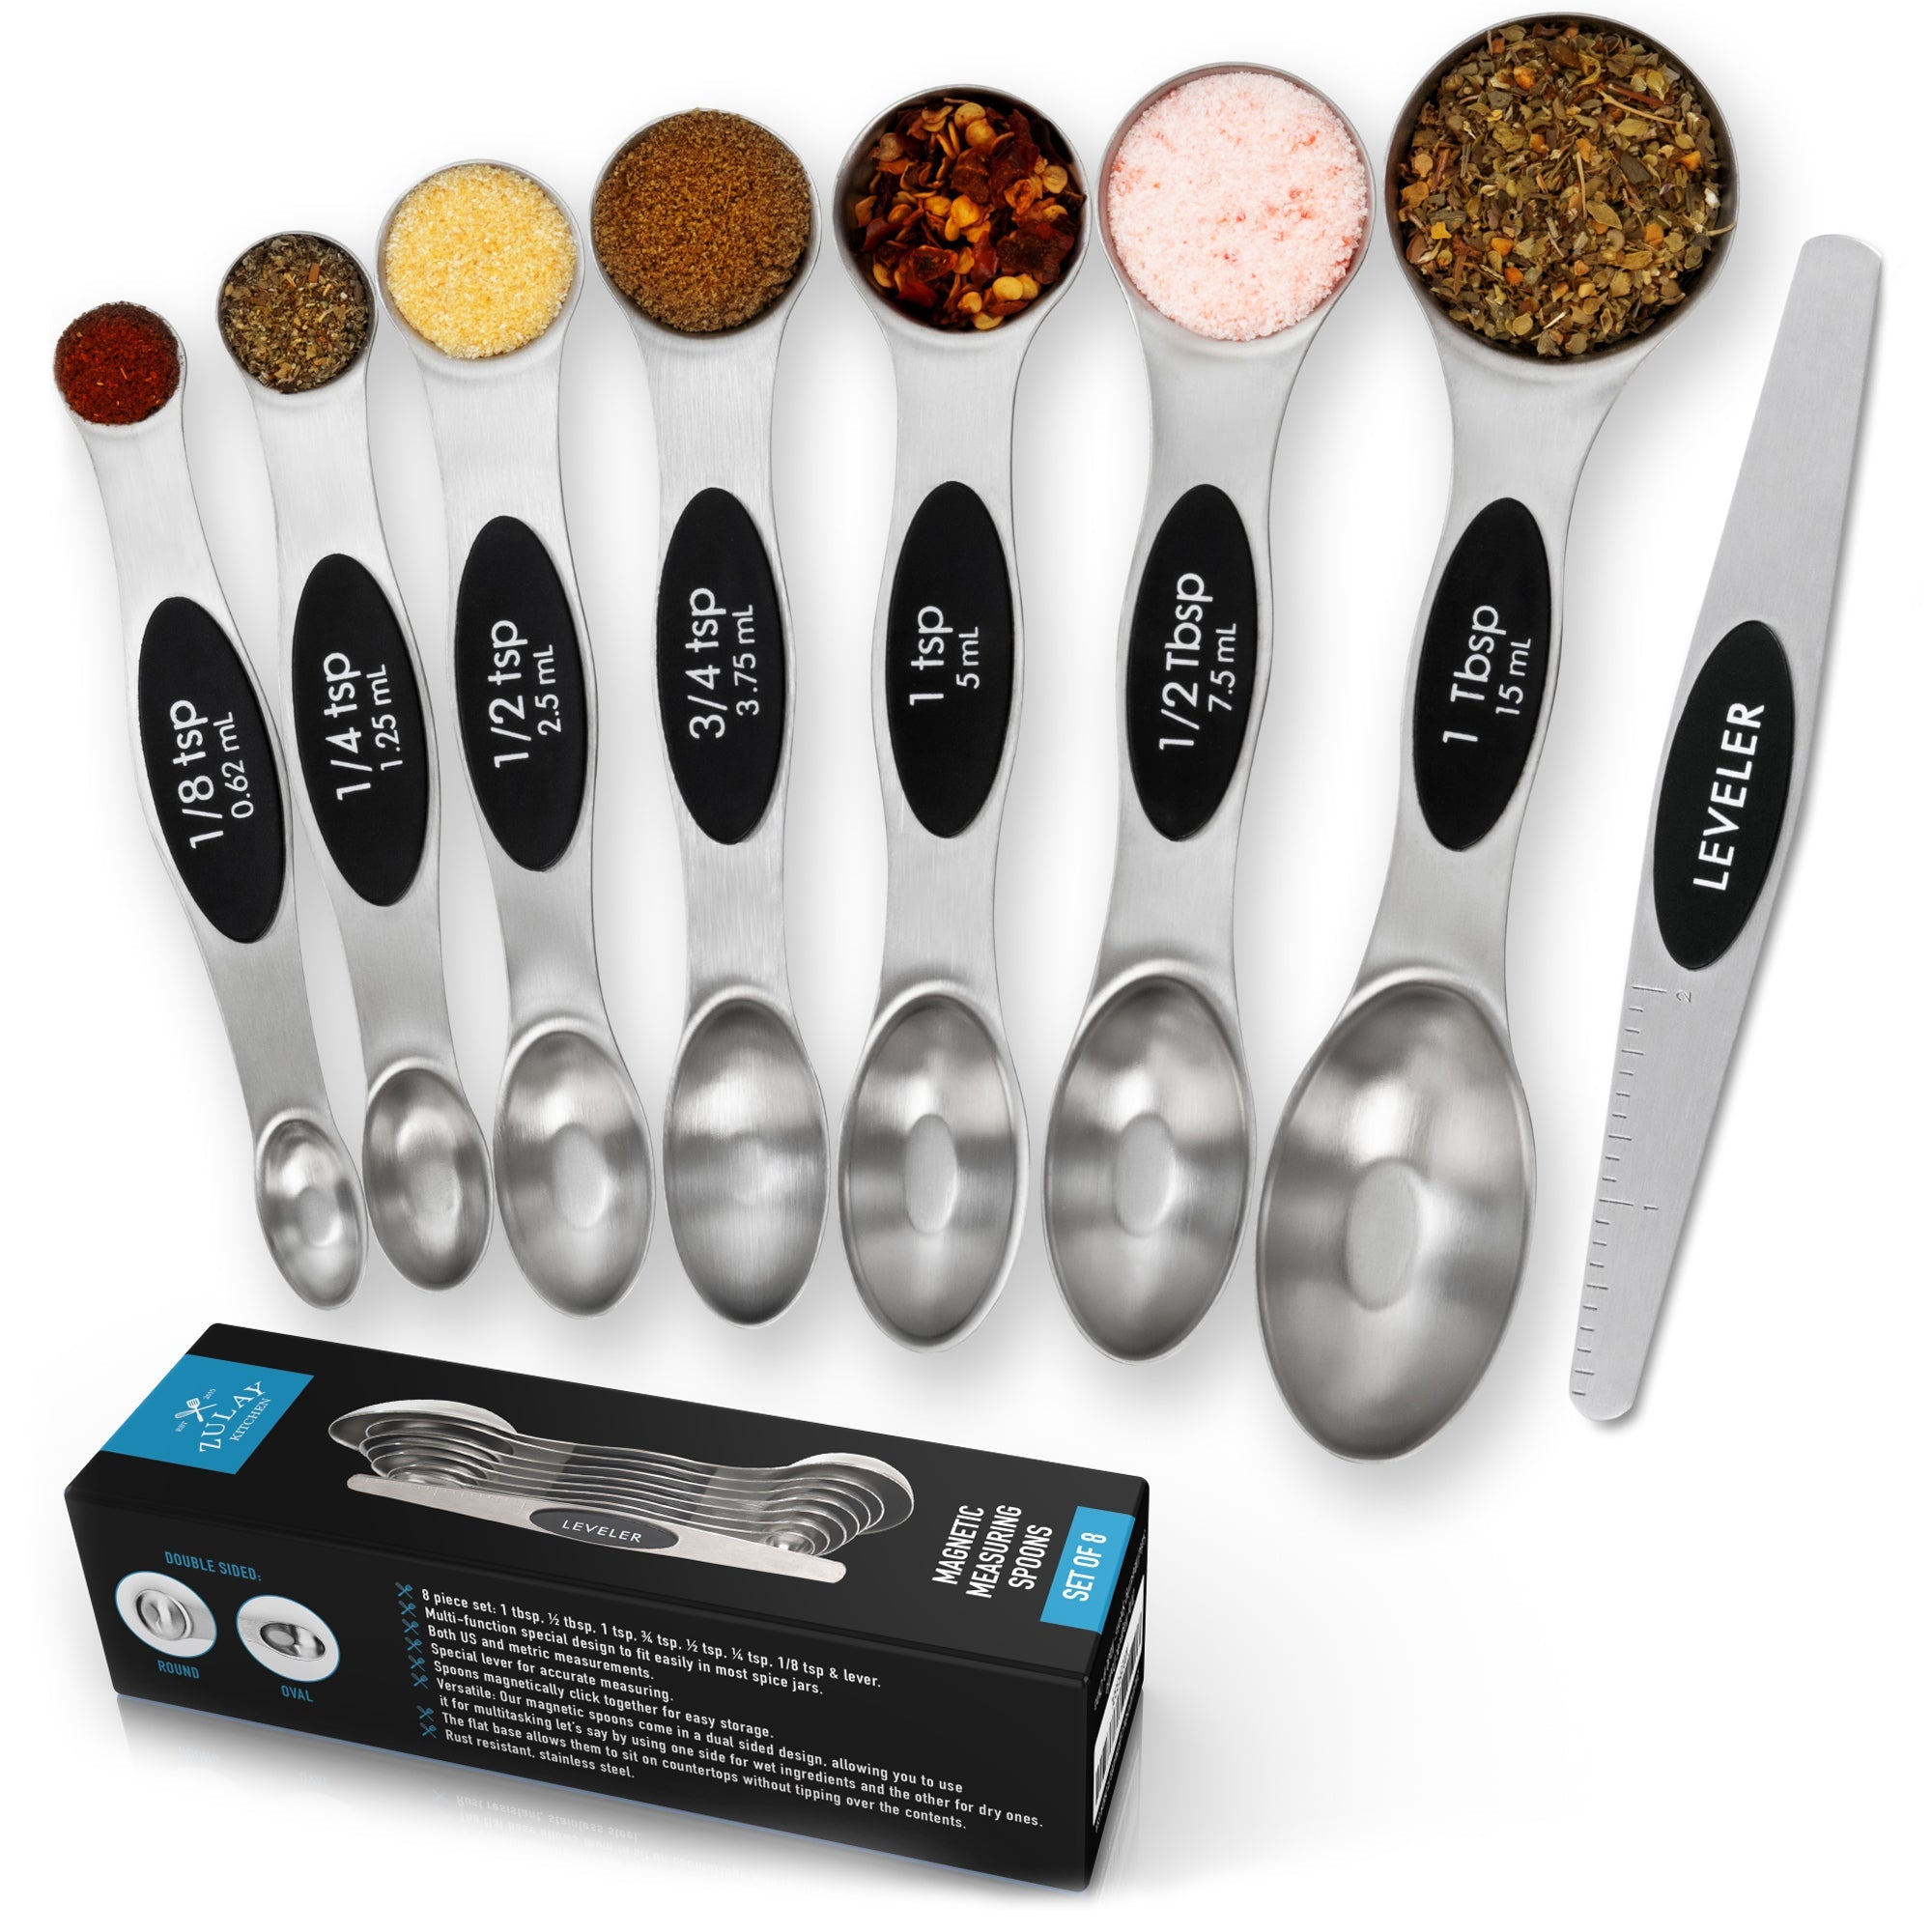 https://www.zulaykitchen.com/cdn/shop/products/magnetic-measuring-spoons-with-levelermagnetic-measuring-spoons-with-levelerzulay-kitchen-clearwaterzulay-kitchenz-mgntc-2side-msrng-spn-934063.jpg?v=1684848514